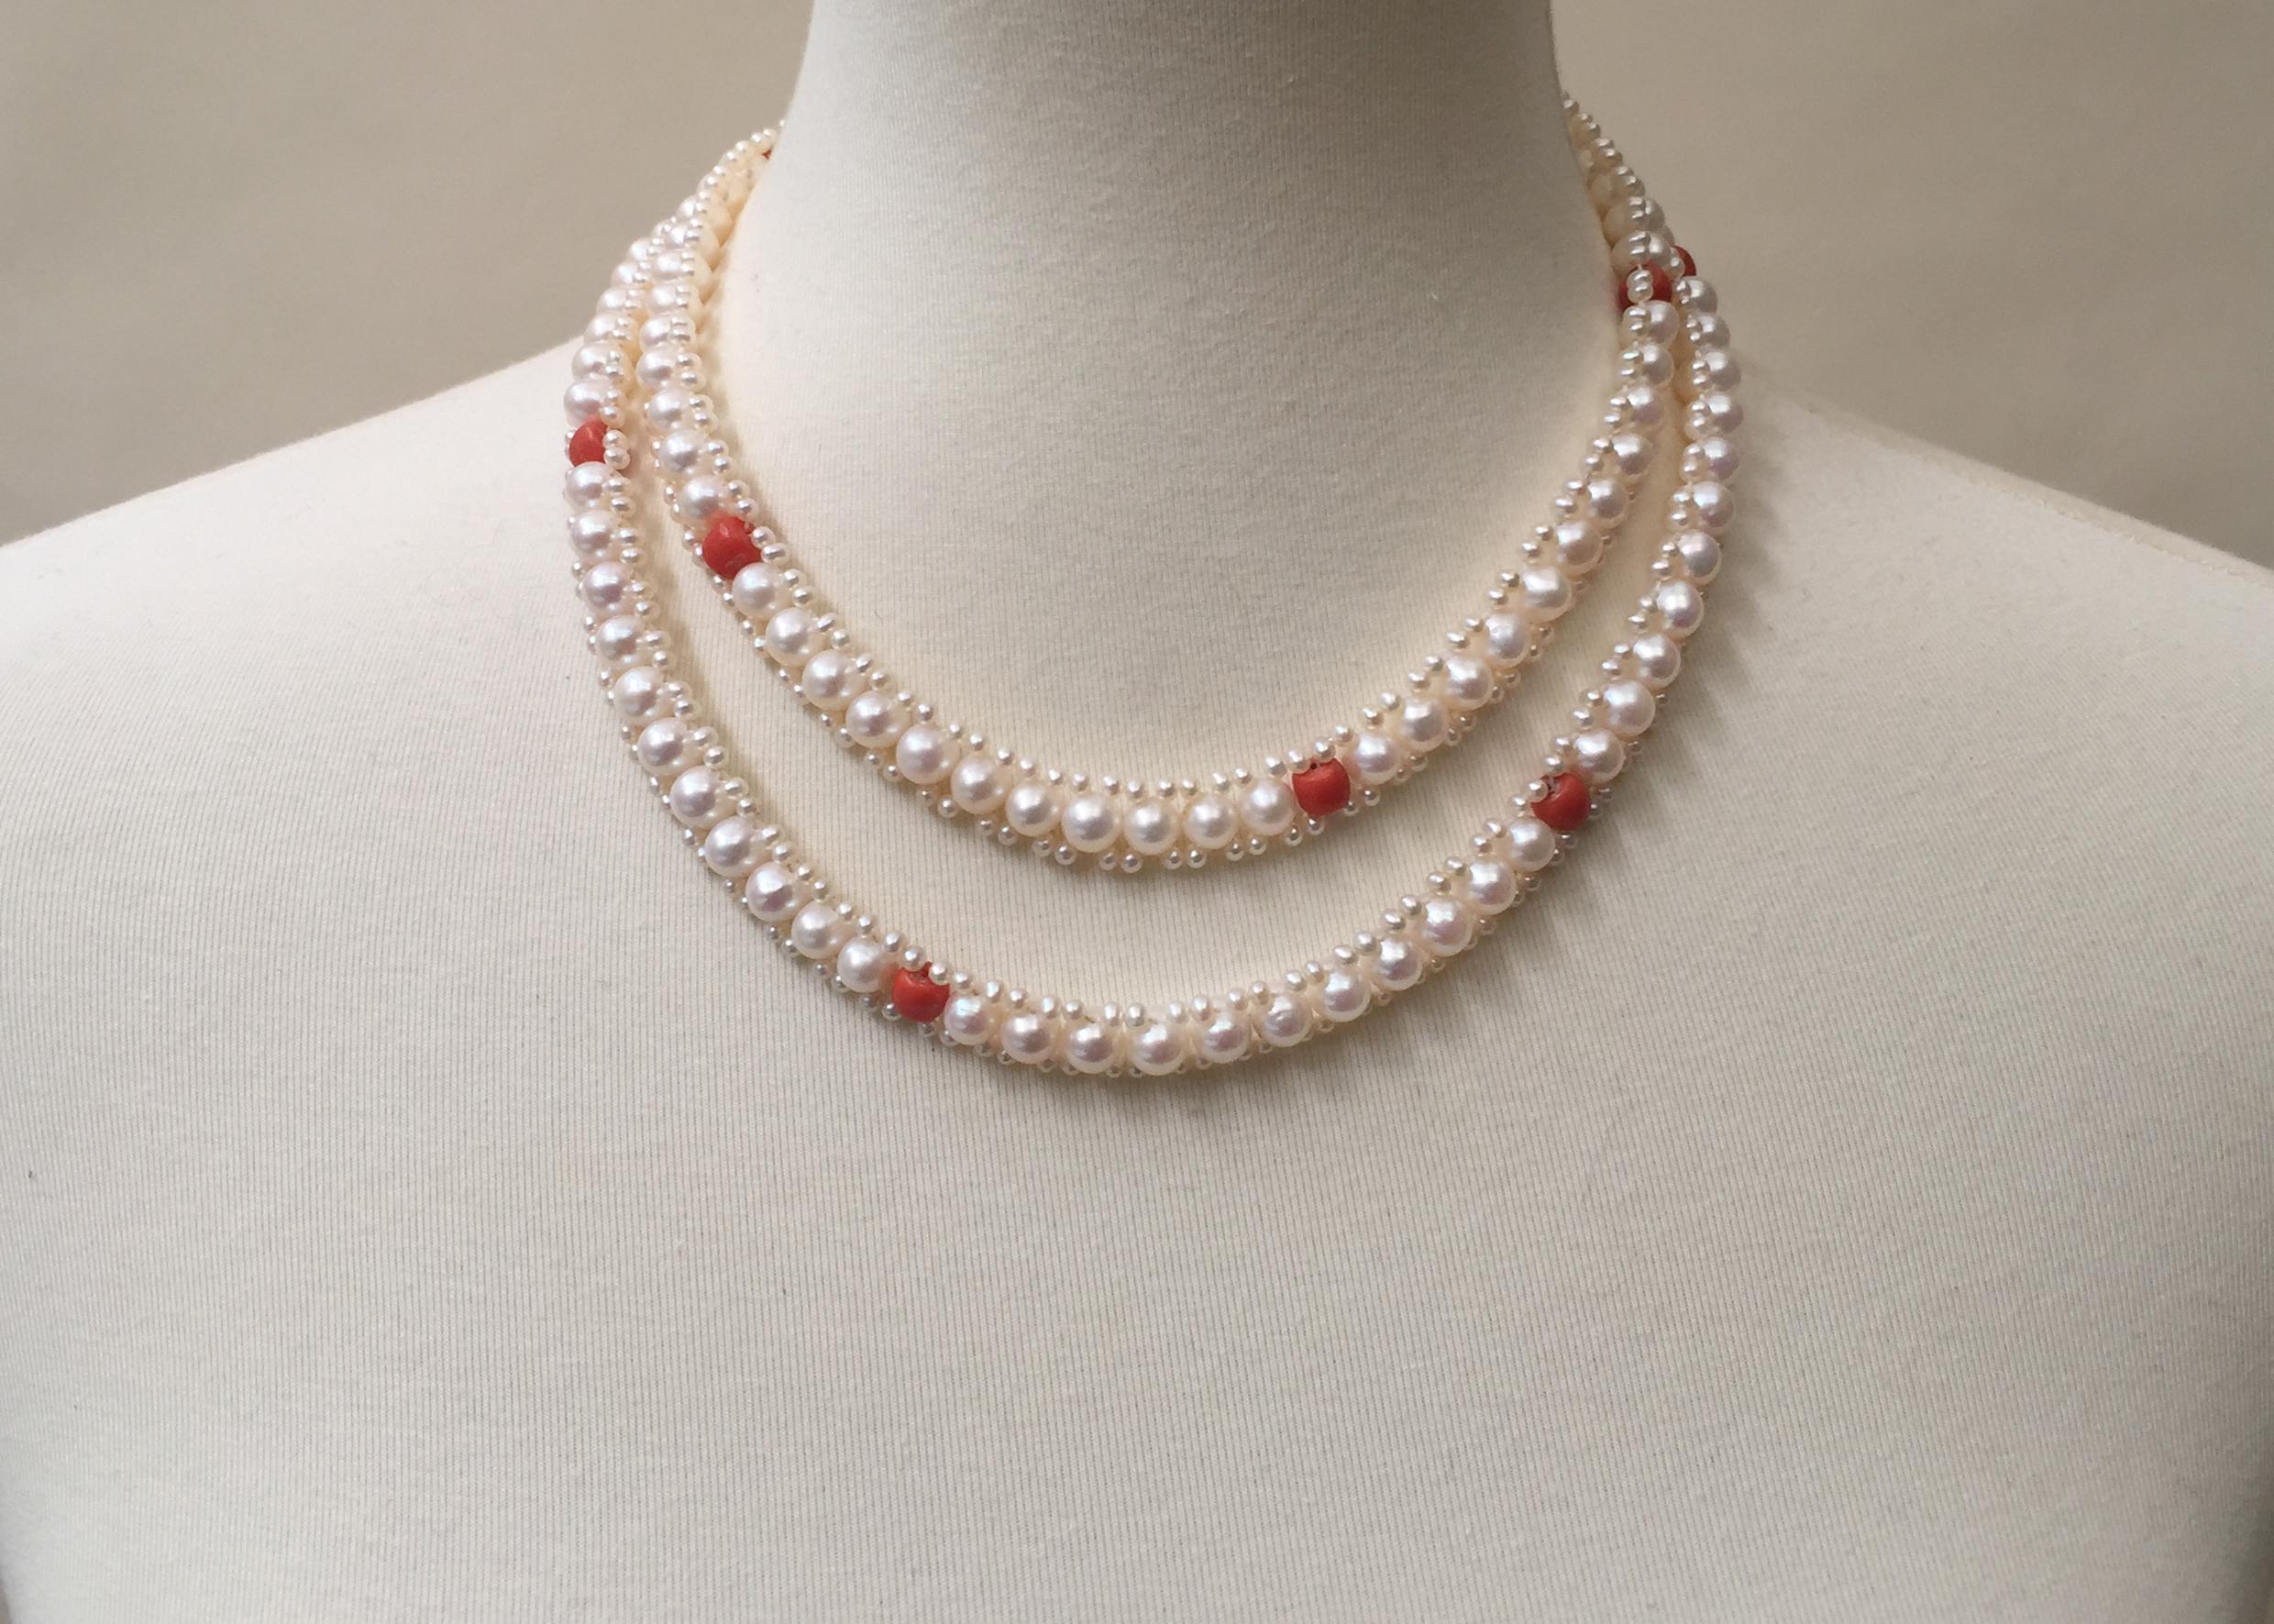 Woven White Pearl and Coral Necklace with Large Baroque Pearl, Gold and Diamonds 2